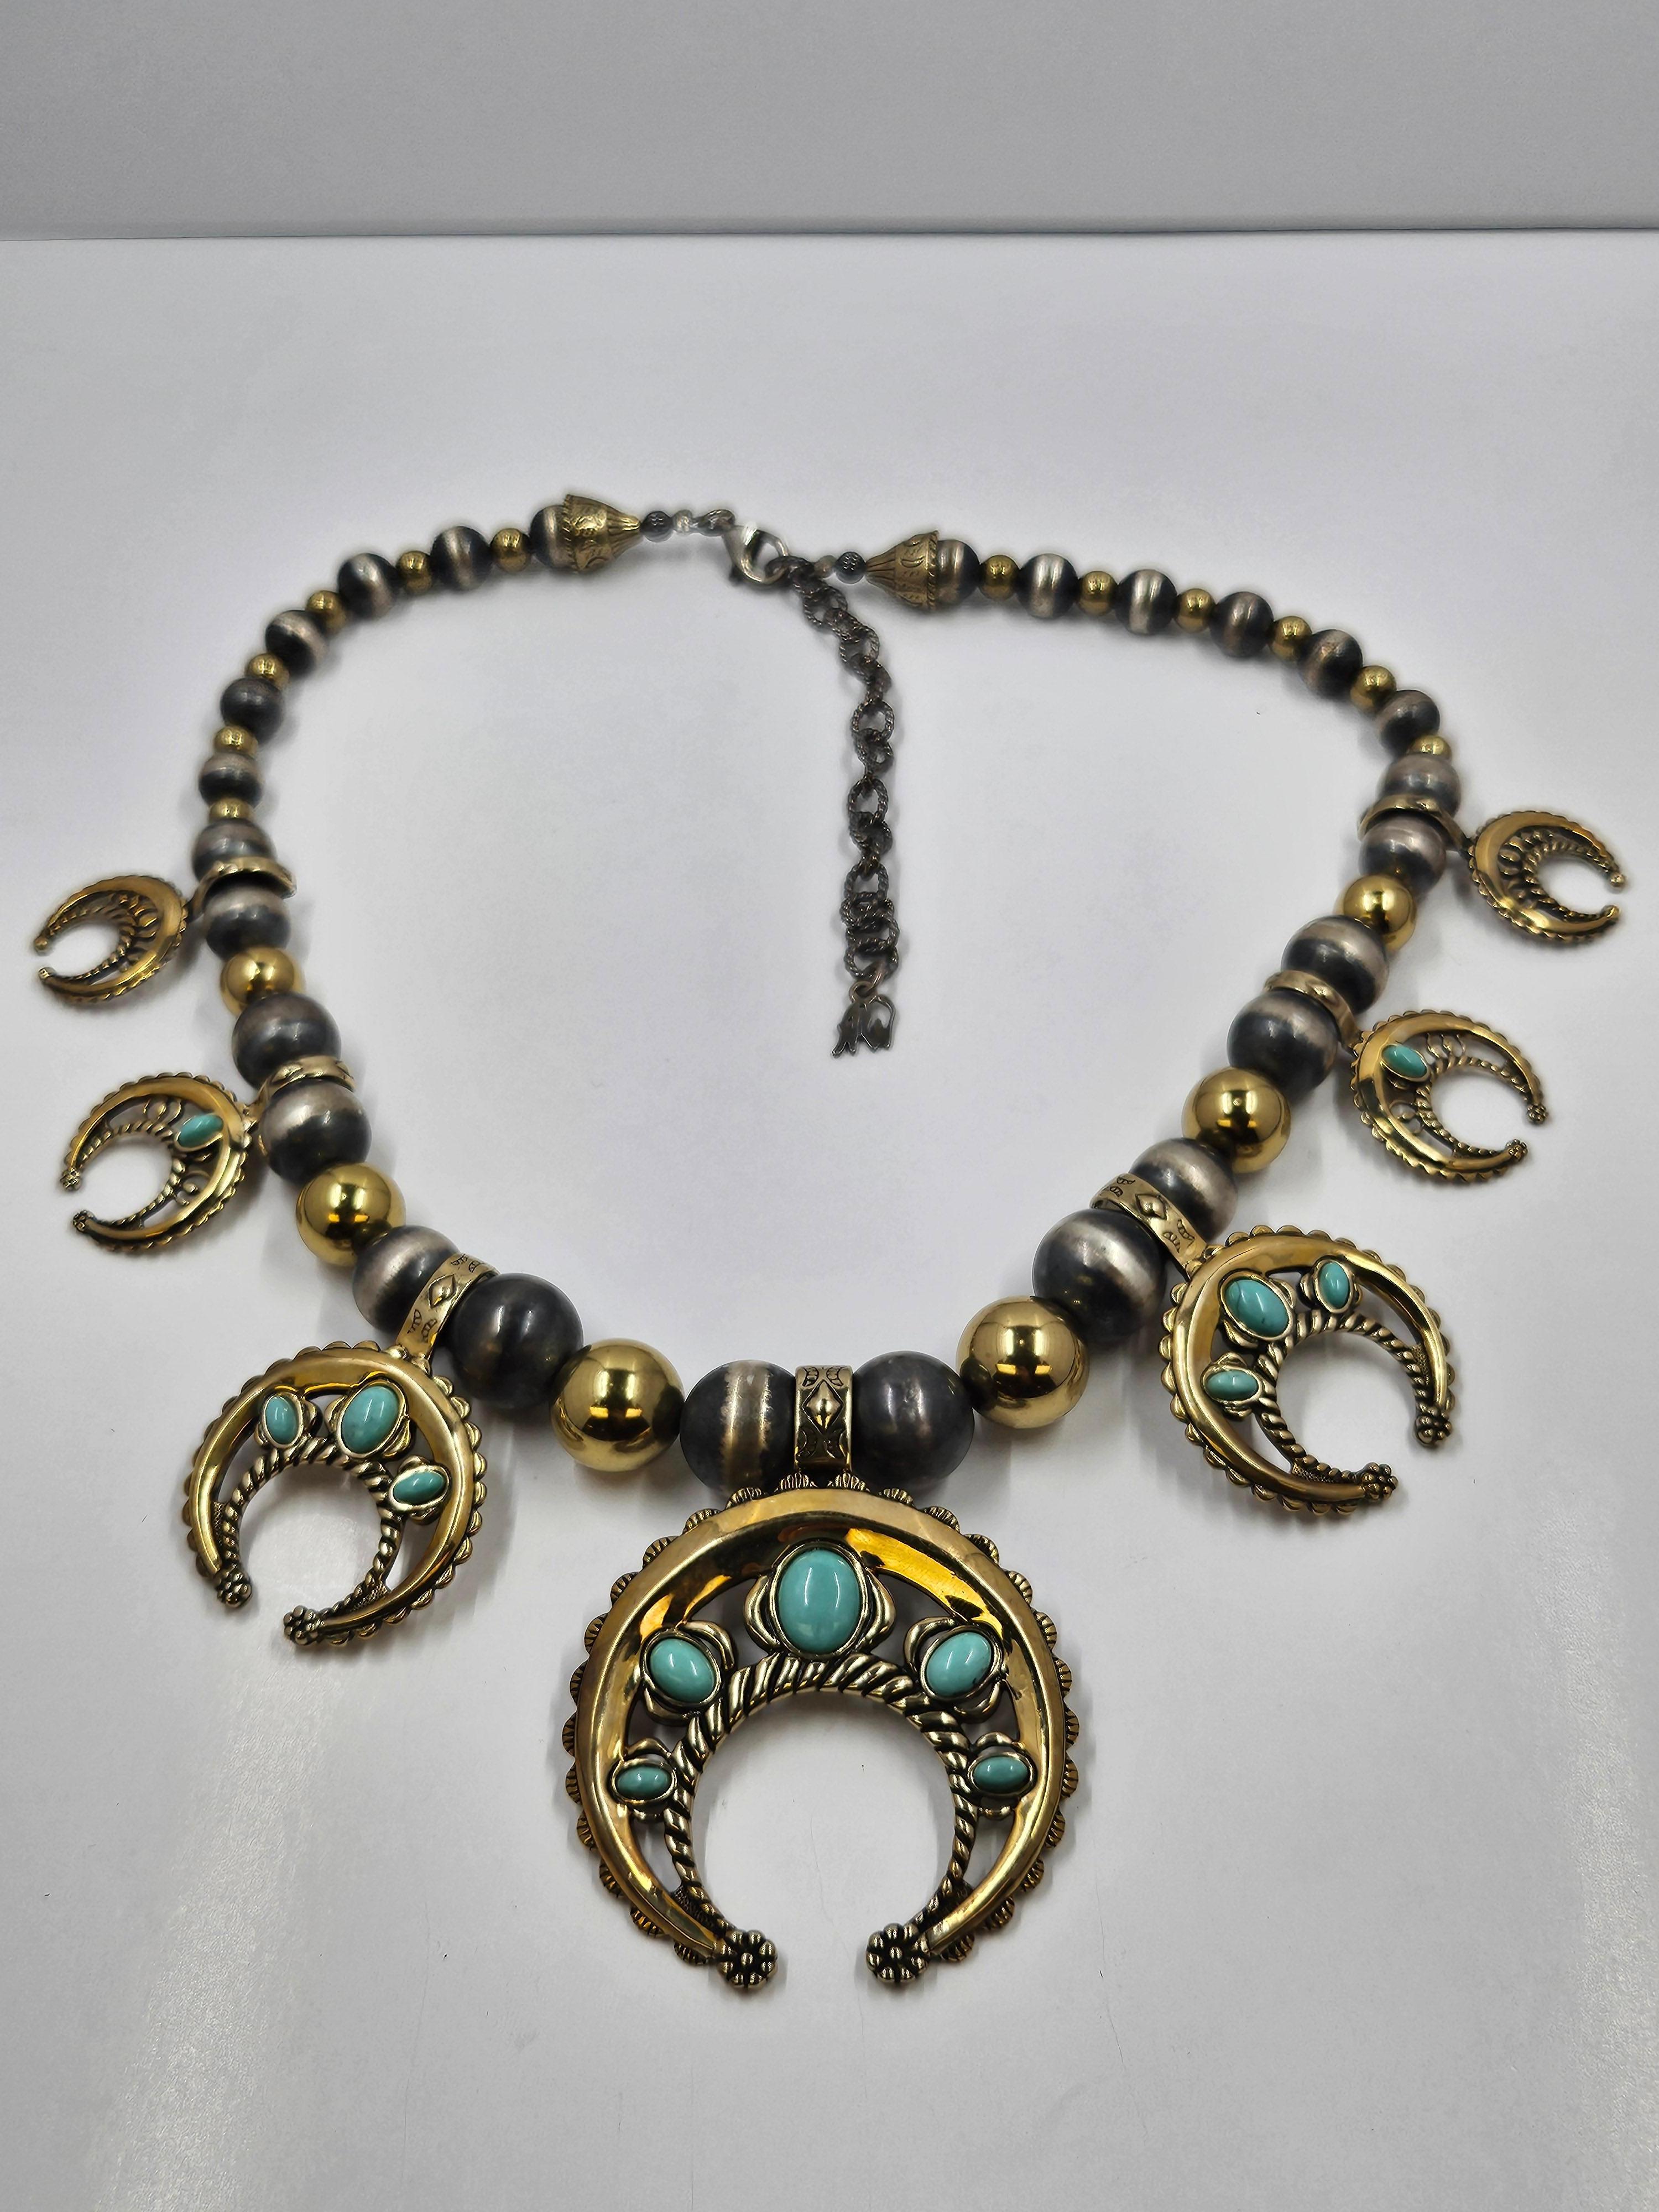 Beautiful Carolyn Pollack American West sterling silver and brass statement necklace. Approximately 21